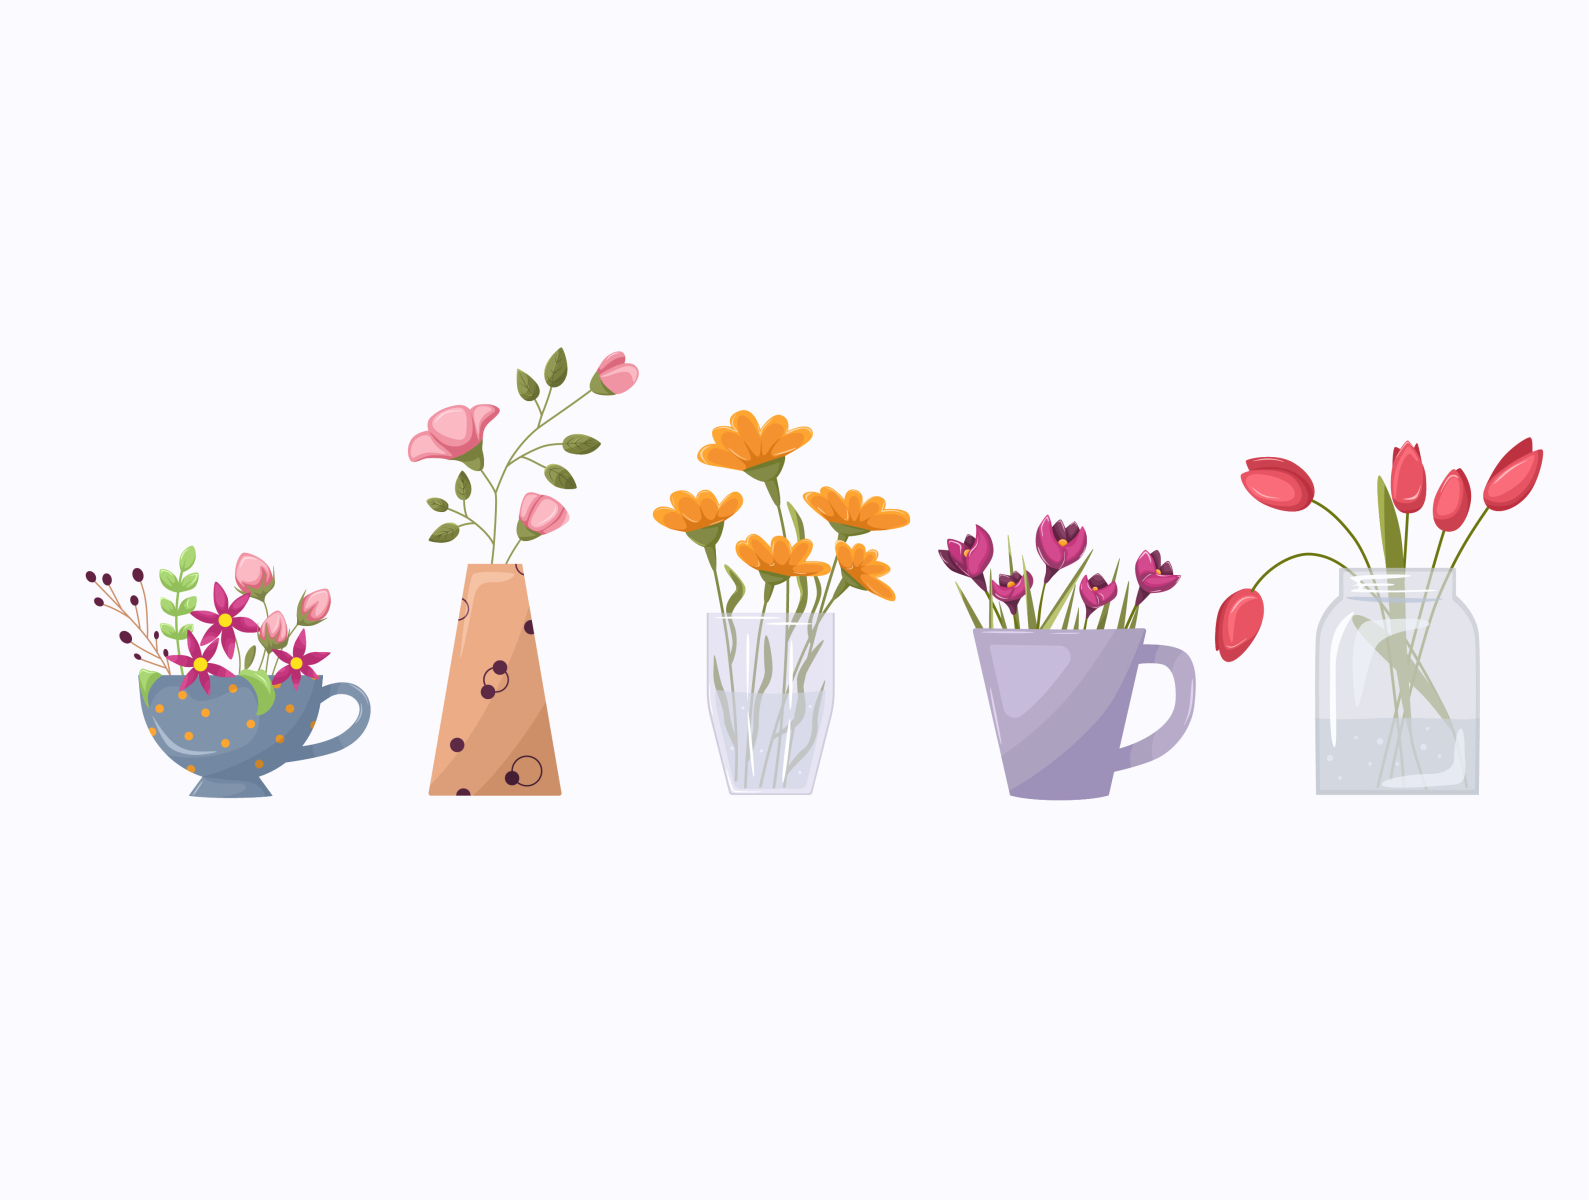 Set of bright flower bouquets by Inna_Goreglyad on Dribbble